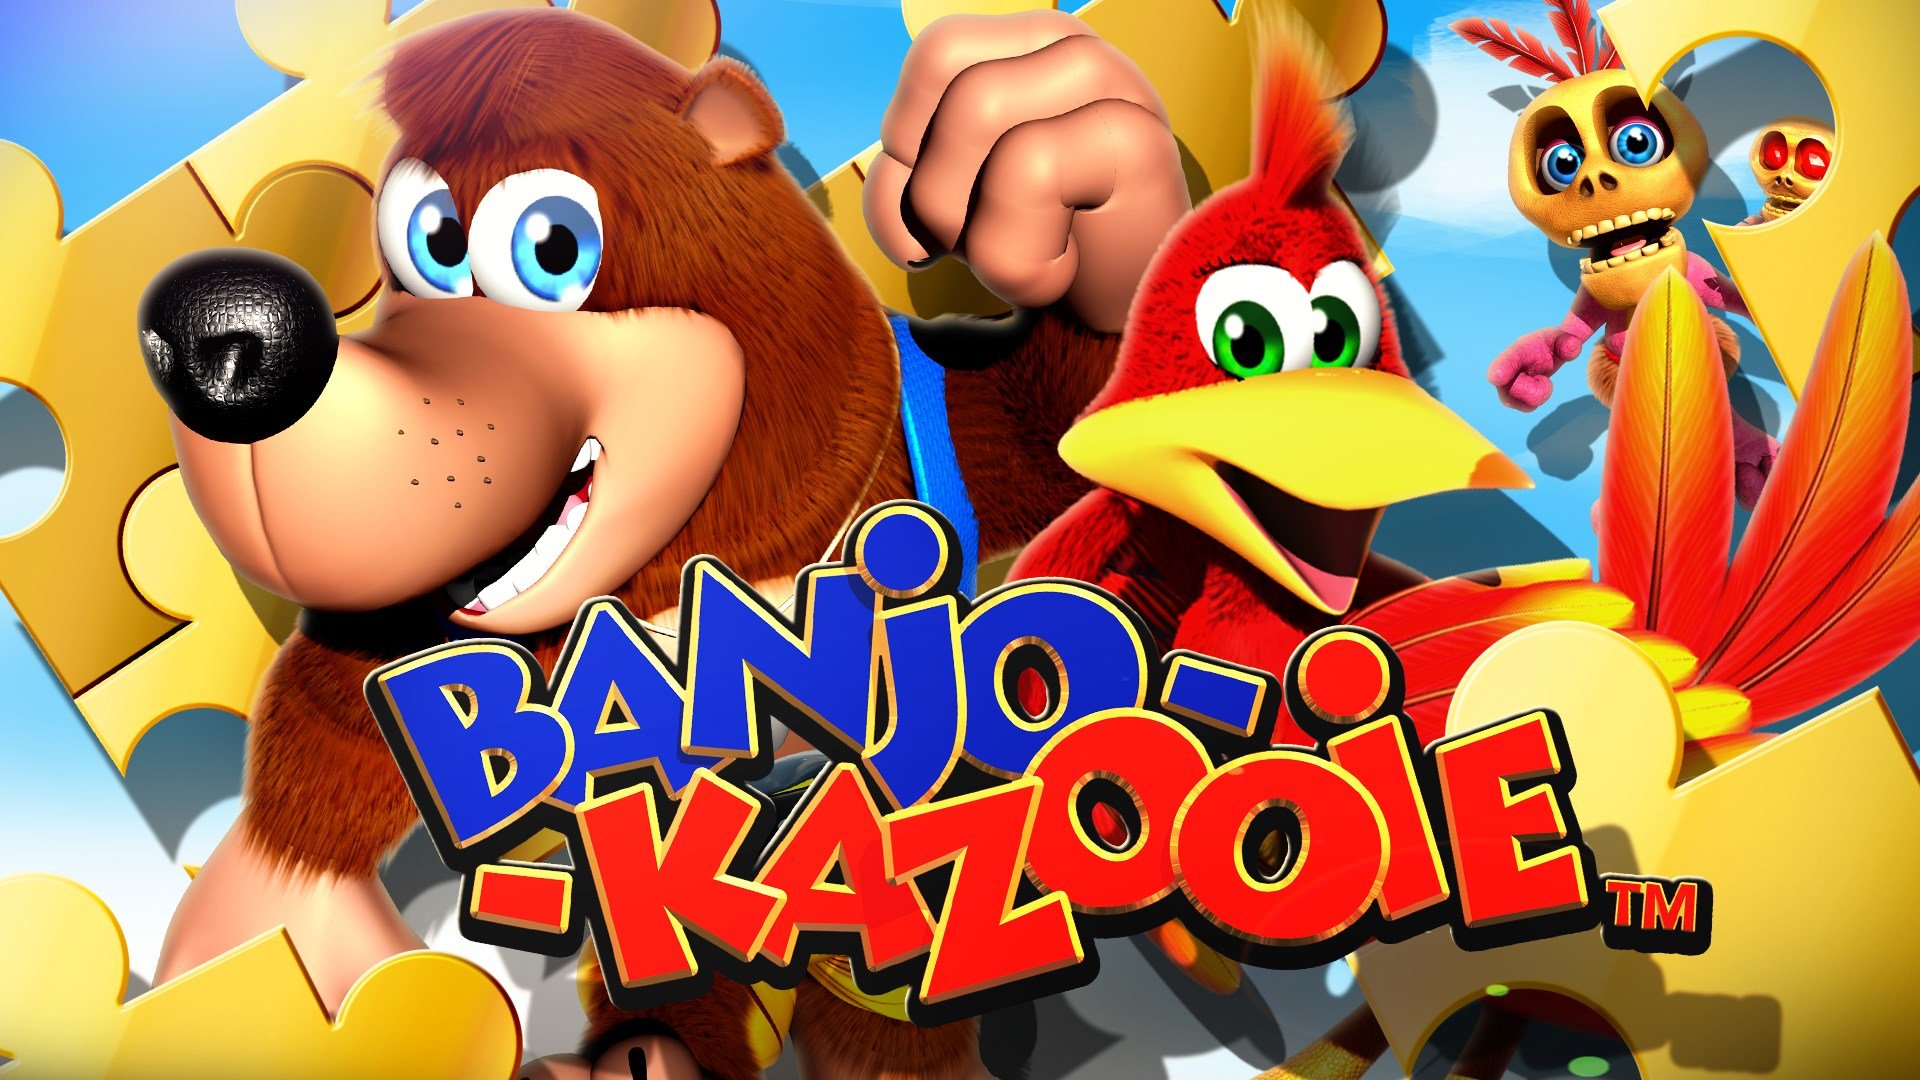 Press The Buttons: Banjo And Kazooie Headed For Xbox 360